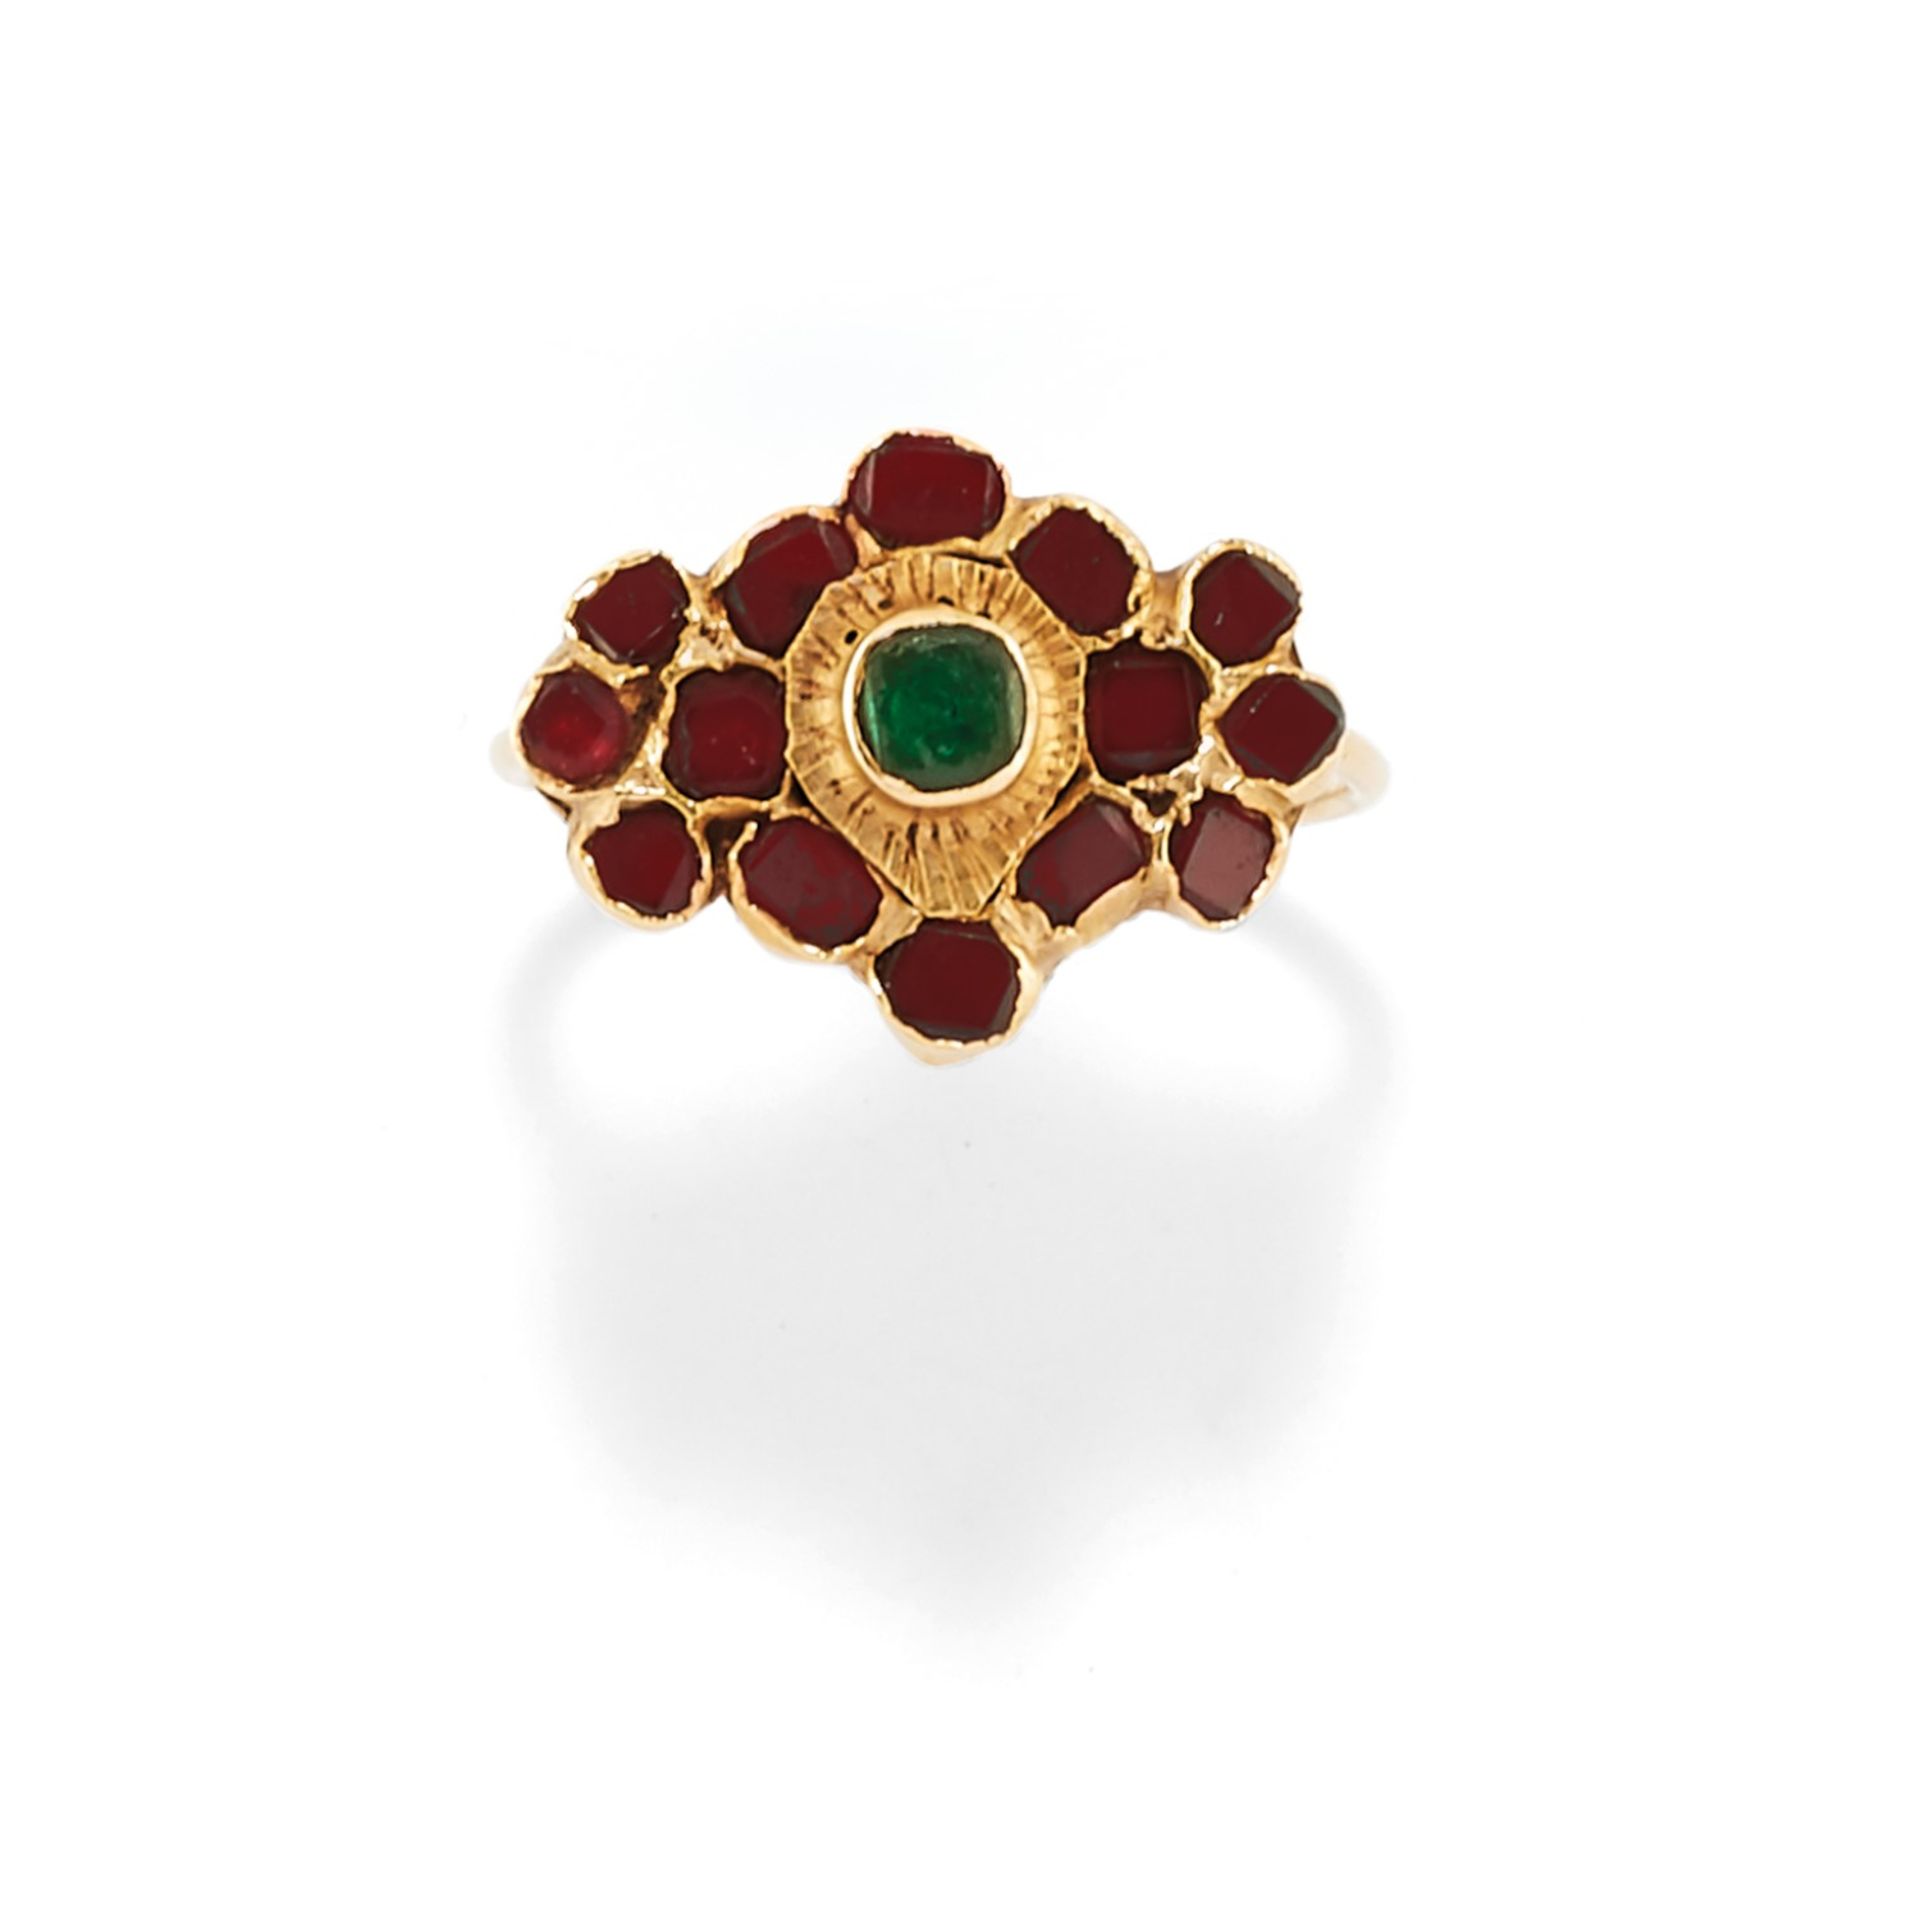 A 18K yellow gold, green gemstone and garnet ring, south-Italy 17th Century - A 18K [...]